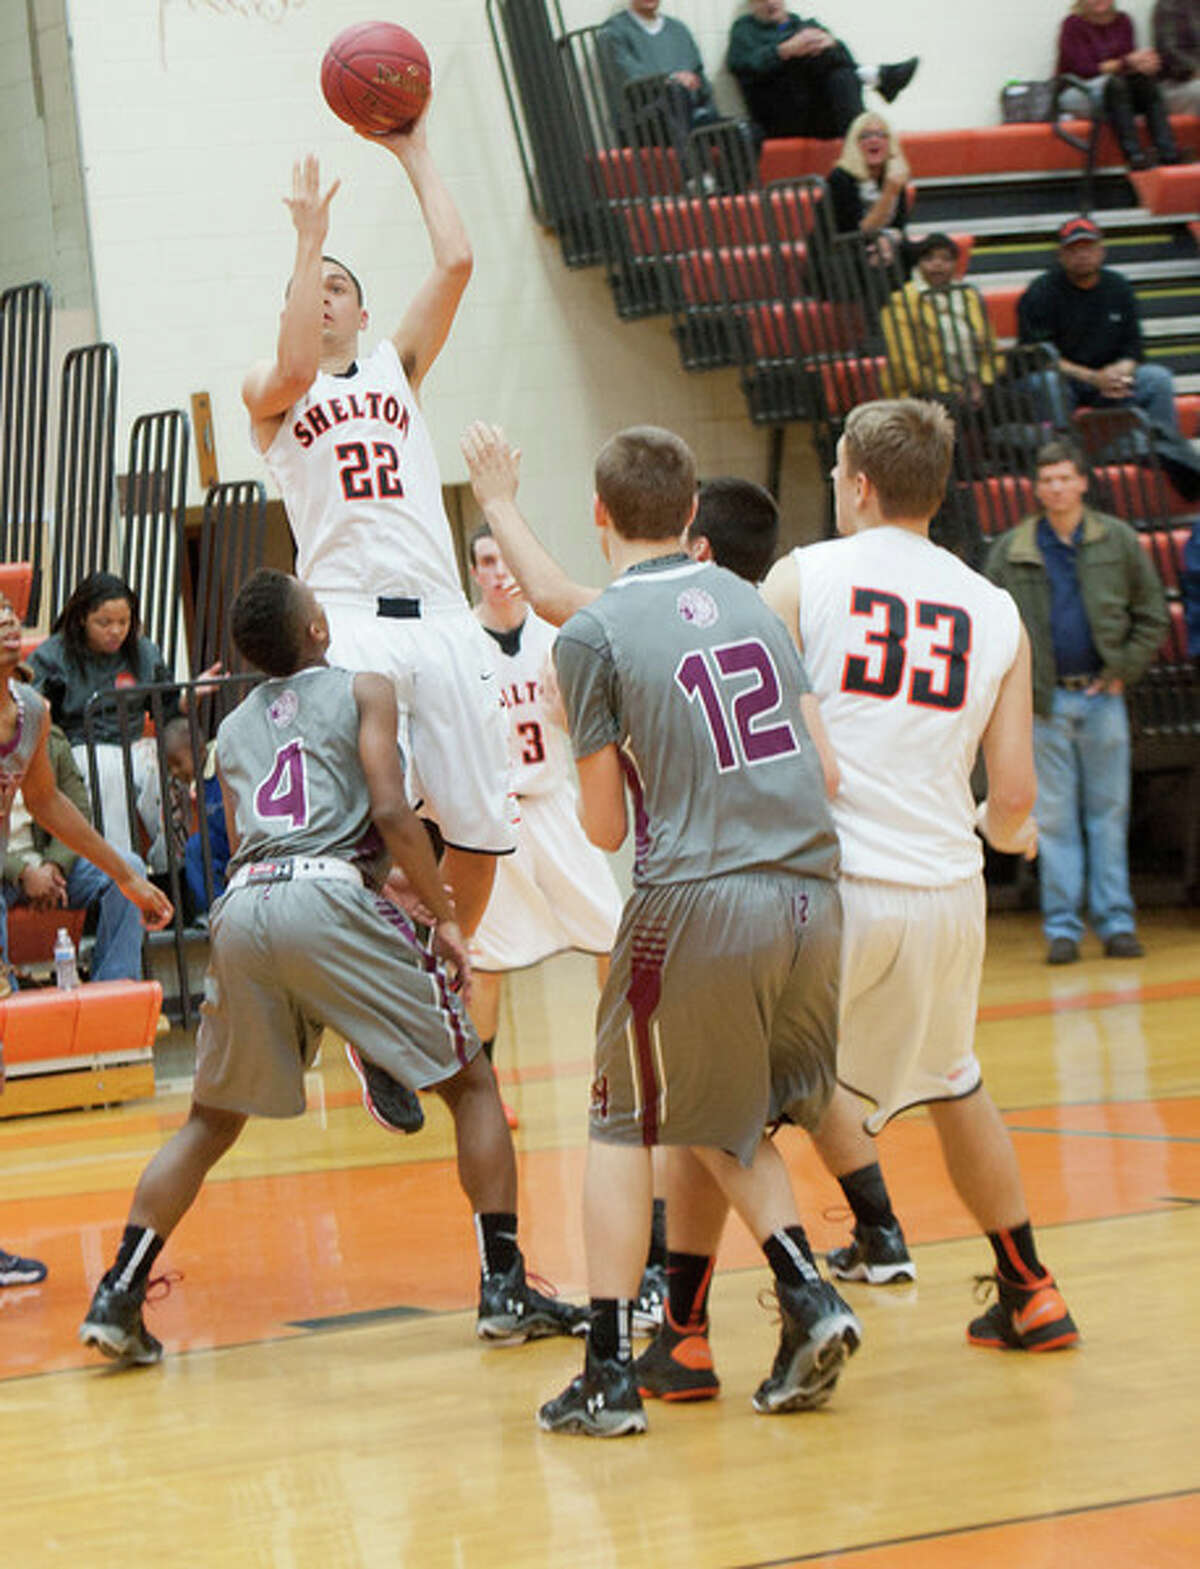 Shelton’s Patrick Murphy puts up a shot during the Gaels’ victory over North Haven Tuesday. (Melanie Stengel — Register)